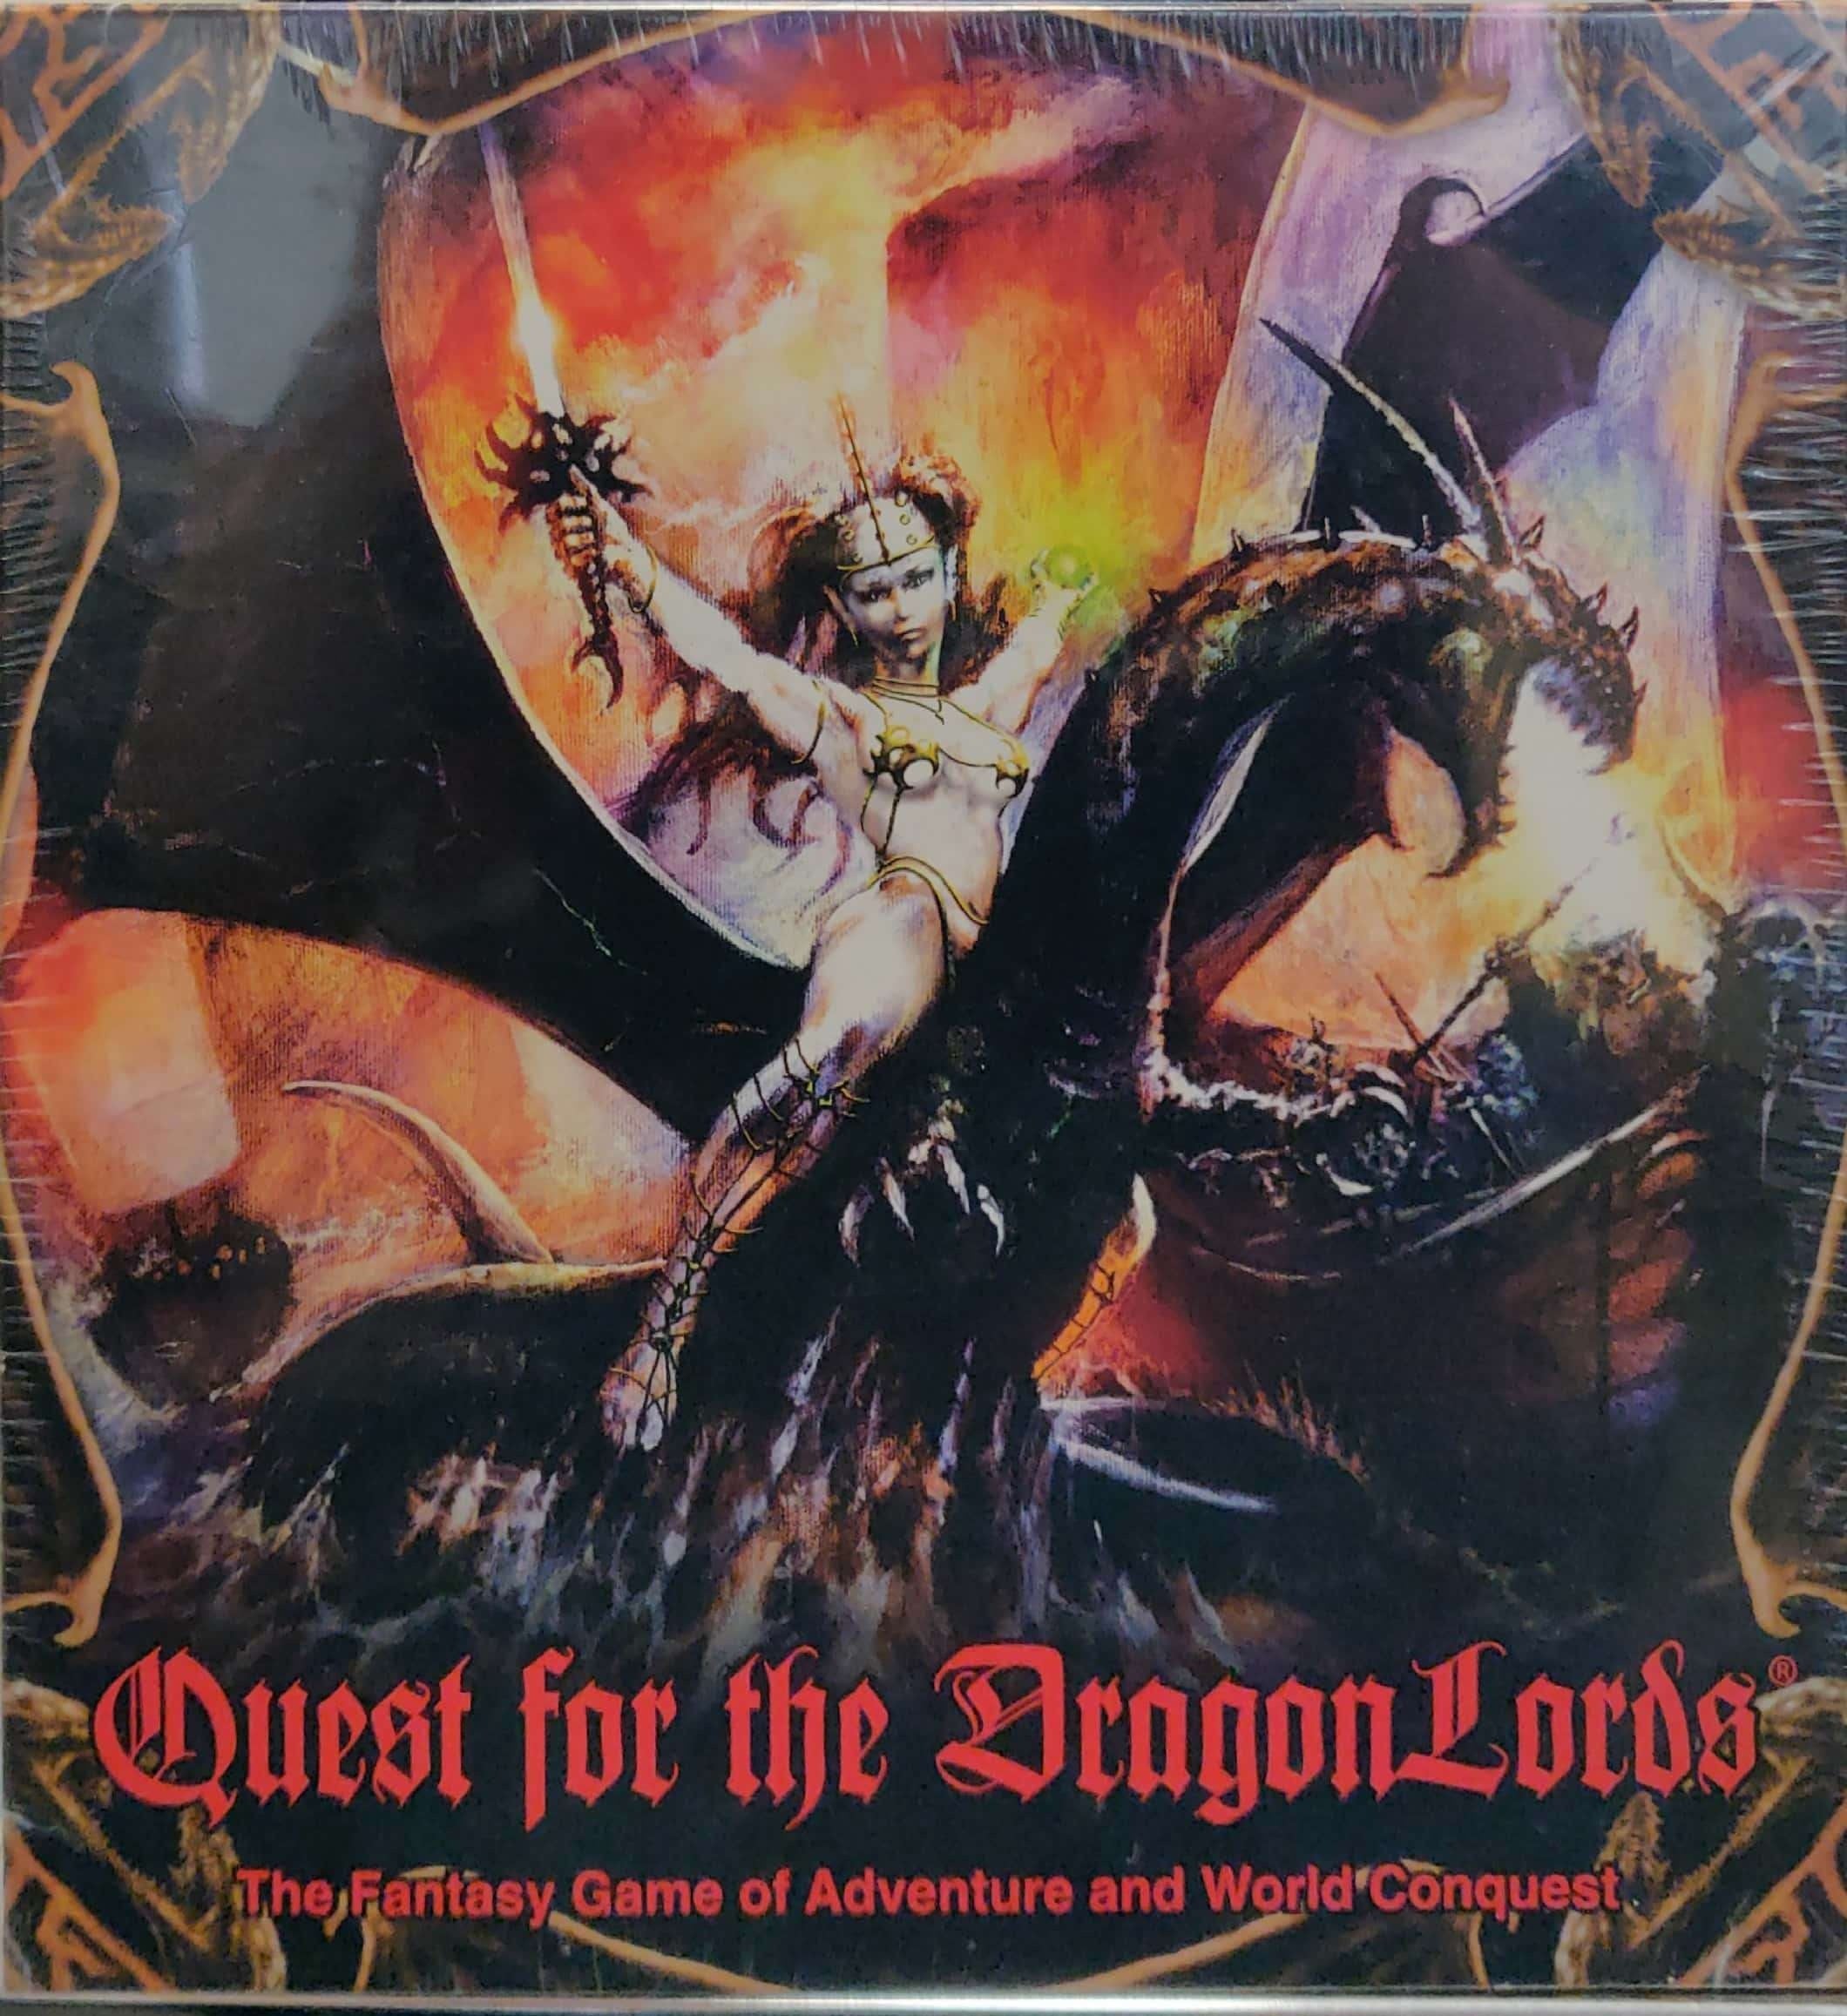 Quest for the Dragonlords - Duel Kingdom